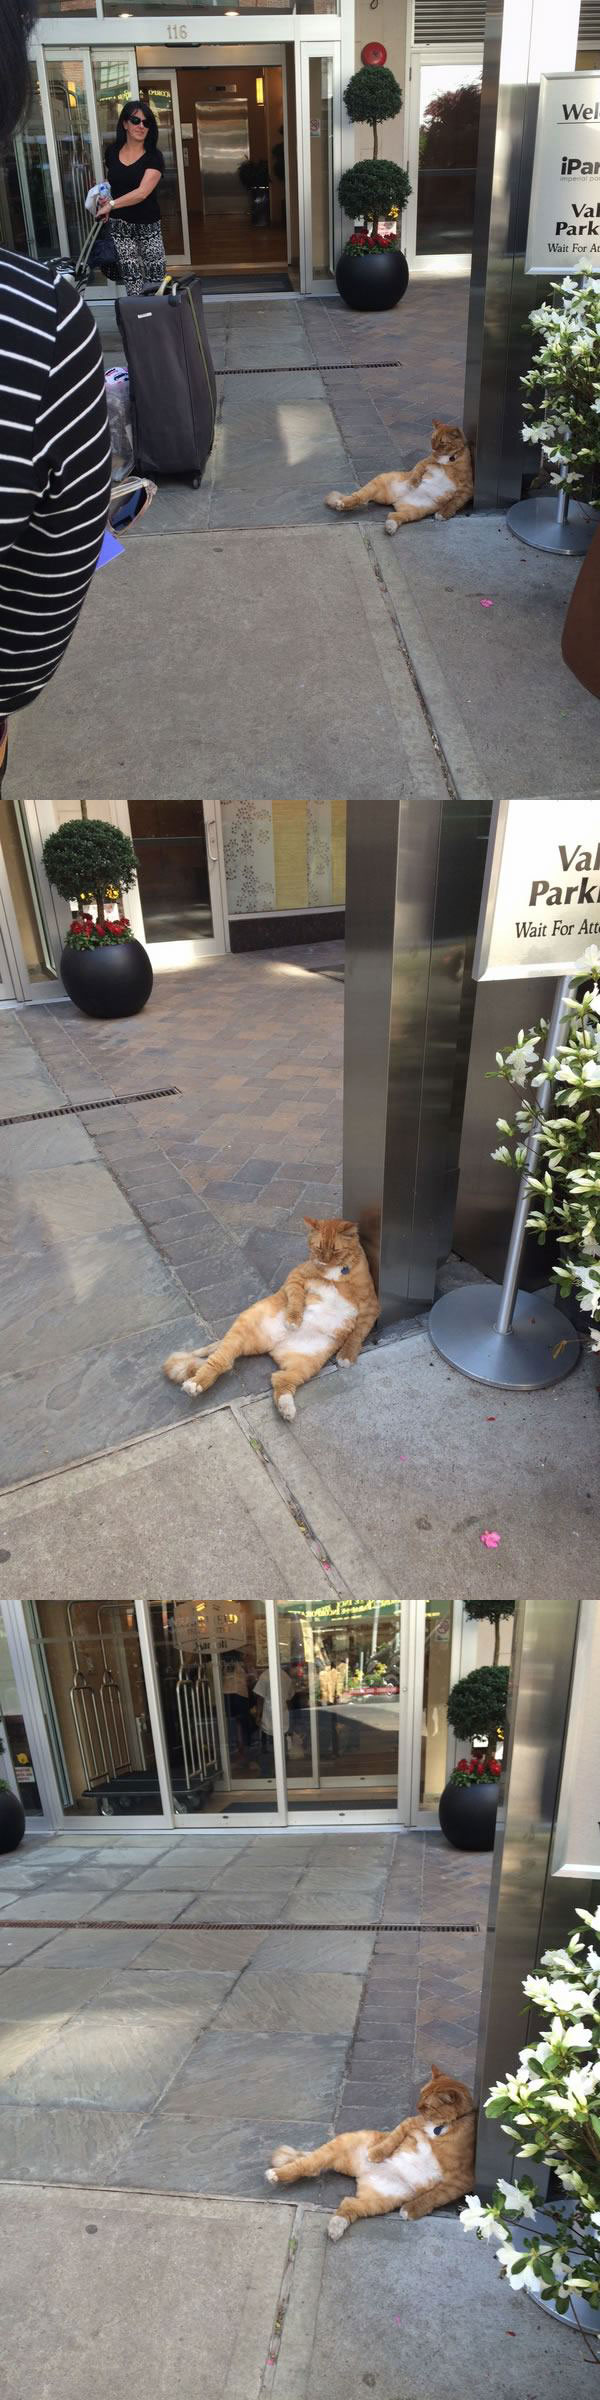 laziest cat ever found minding this hotel entrance